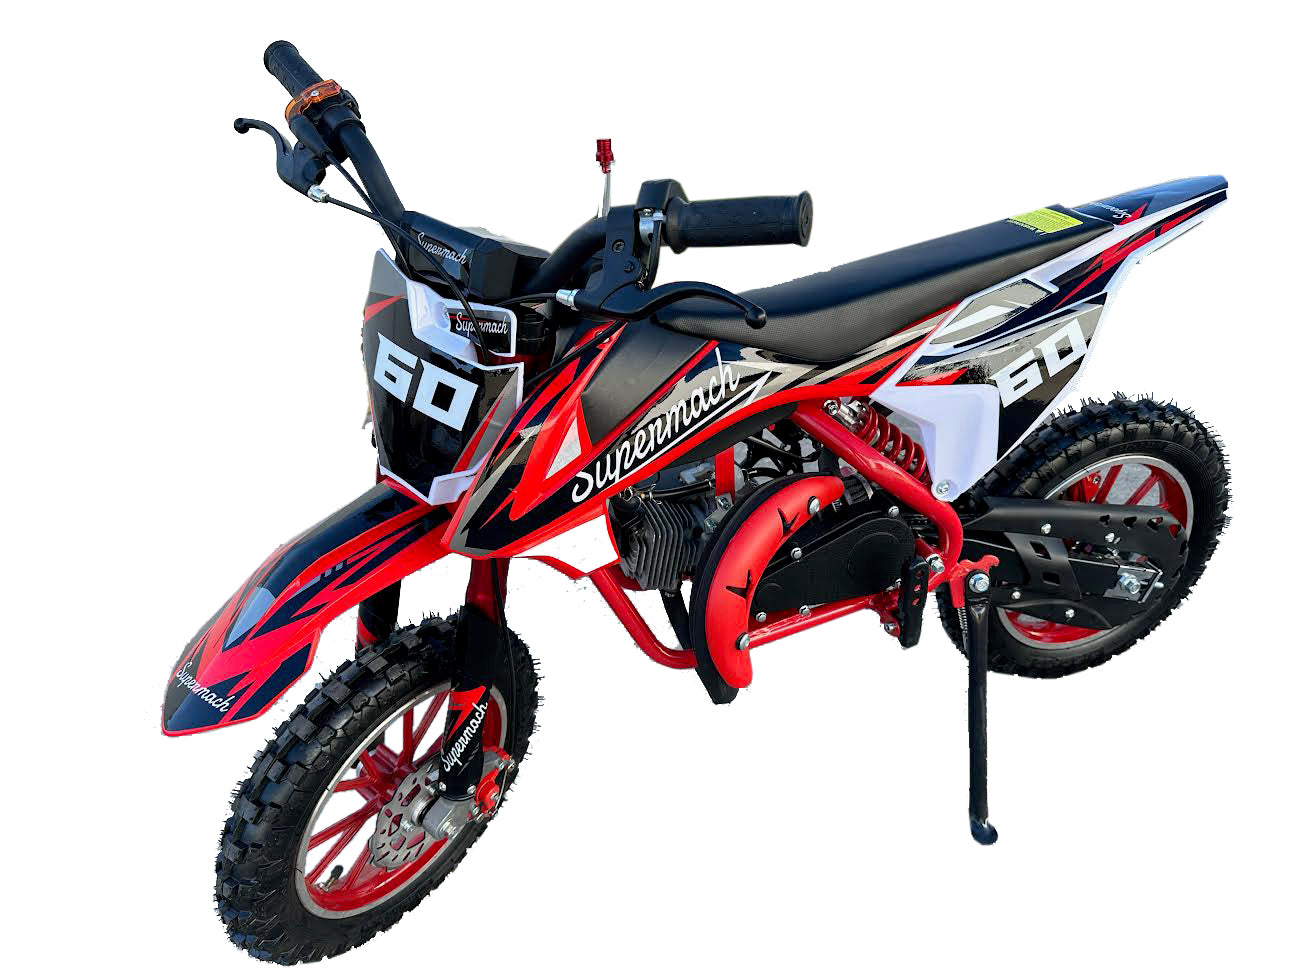 49cc 2-Stroke Dirt Bike Air-Cooled Off-Road for Kids